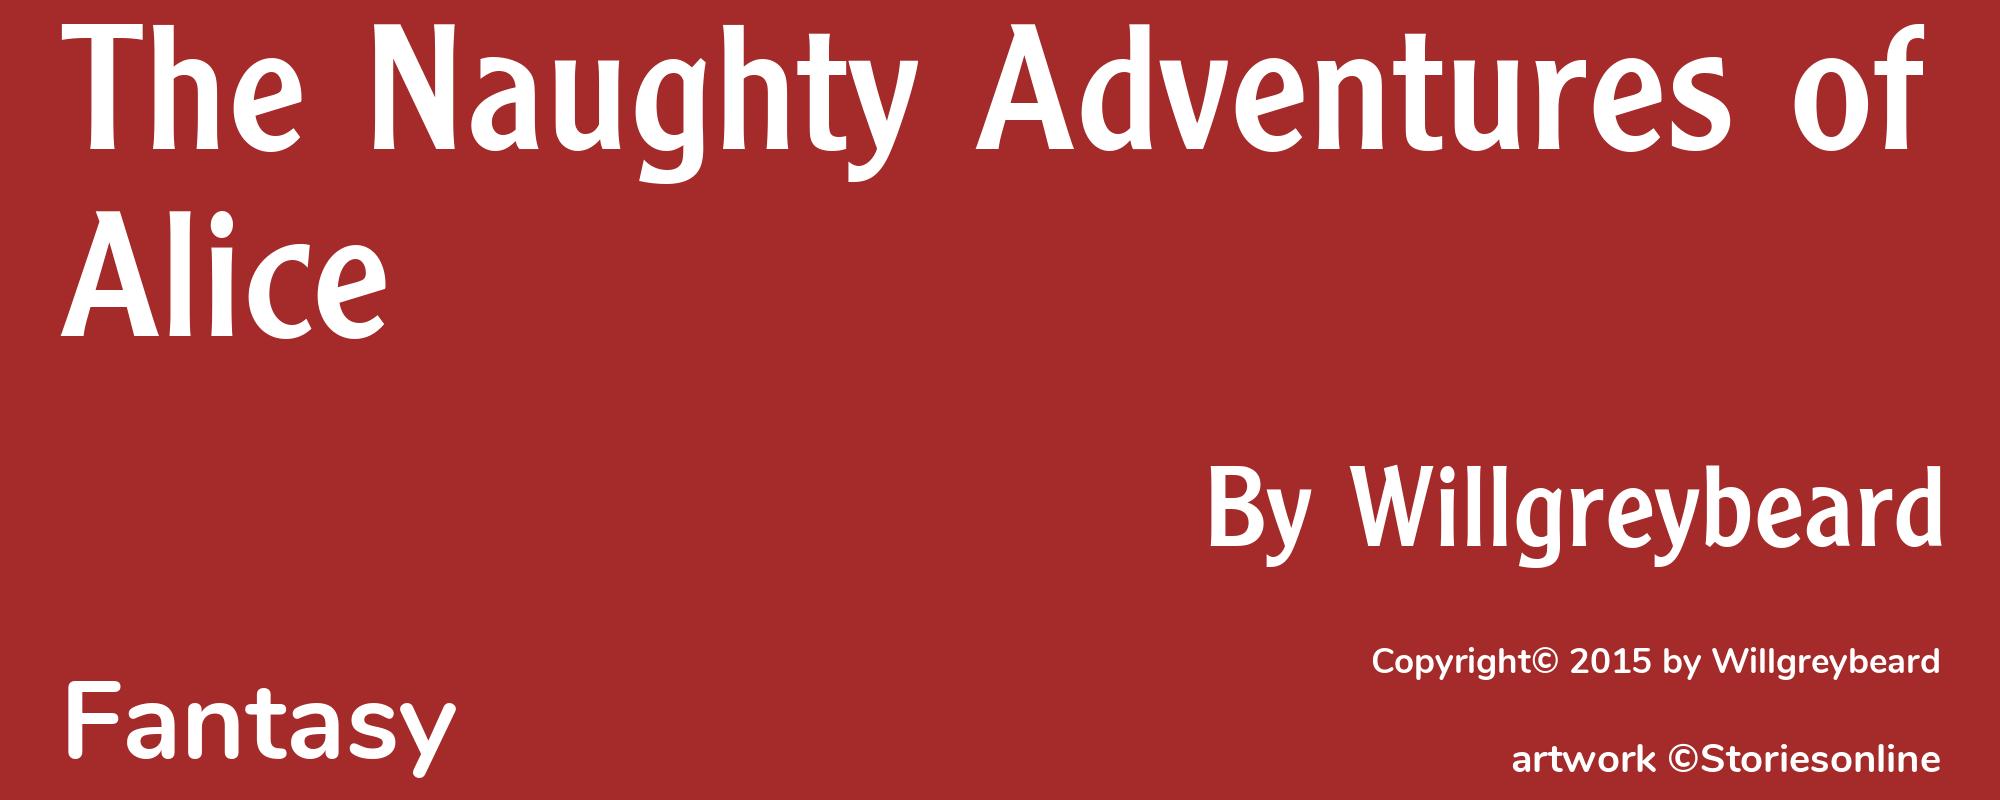 The Naughty Adventures of Alice - Cover